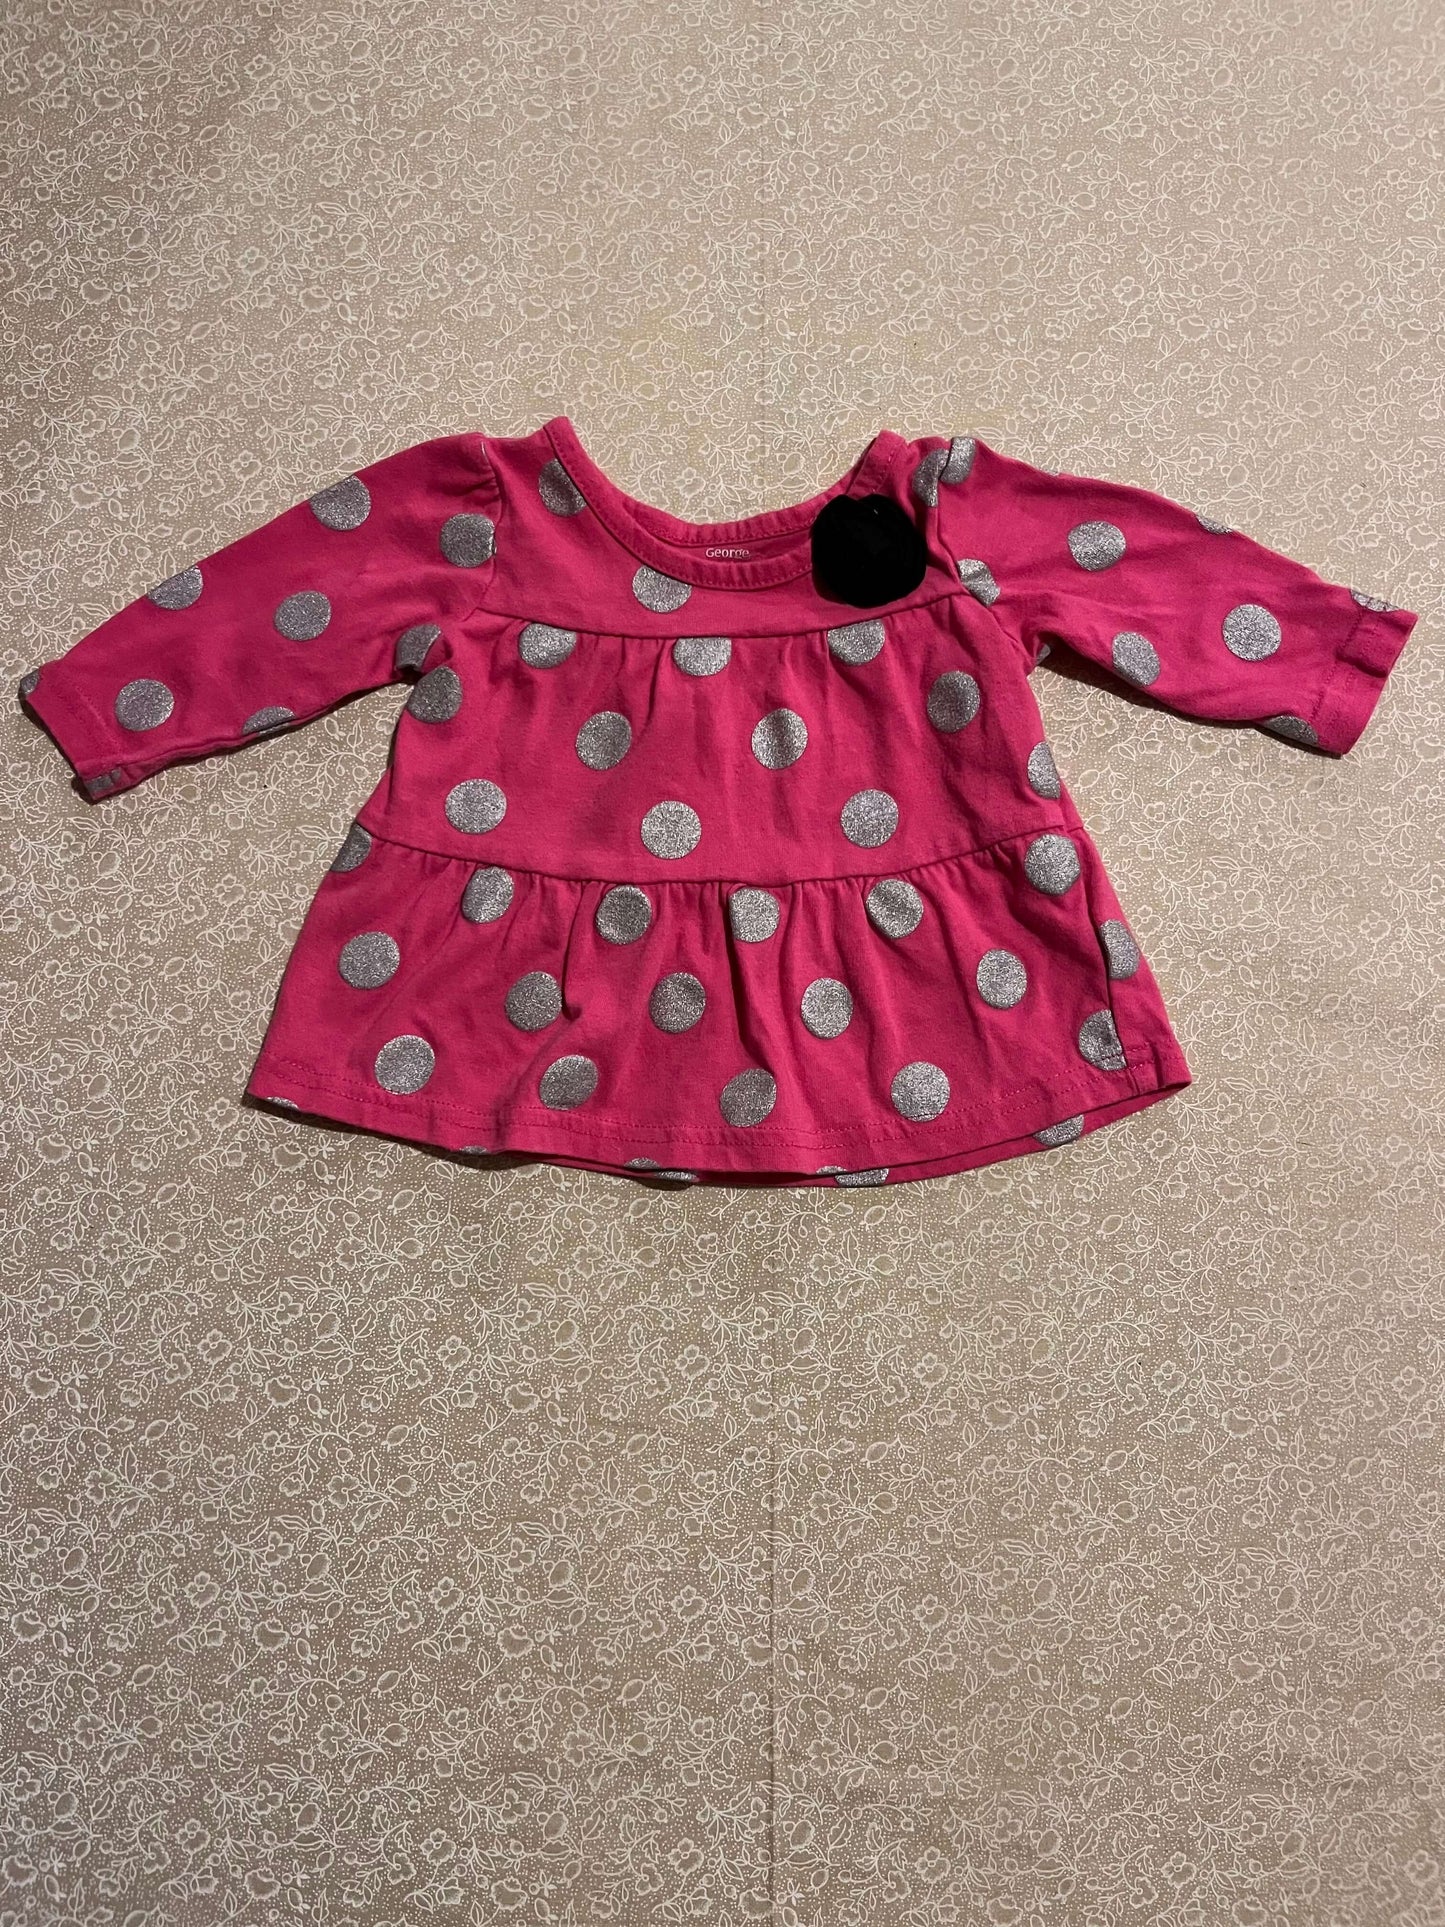 0-3-month-long-sleeve-shirt-george-pink-grey-dots-flower